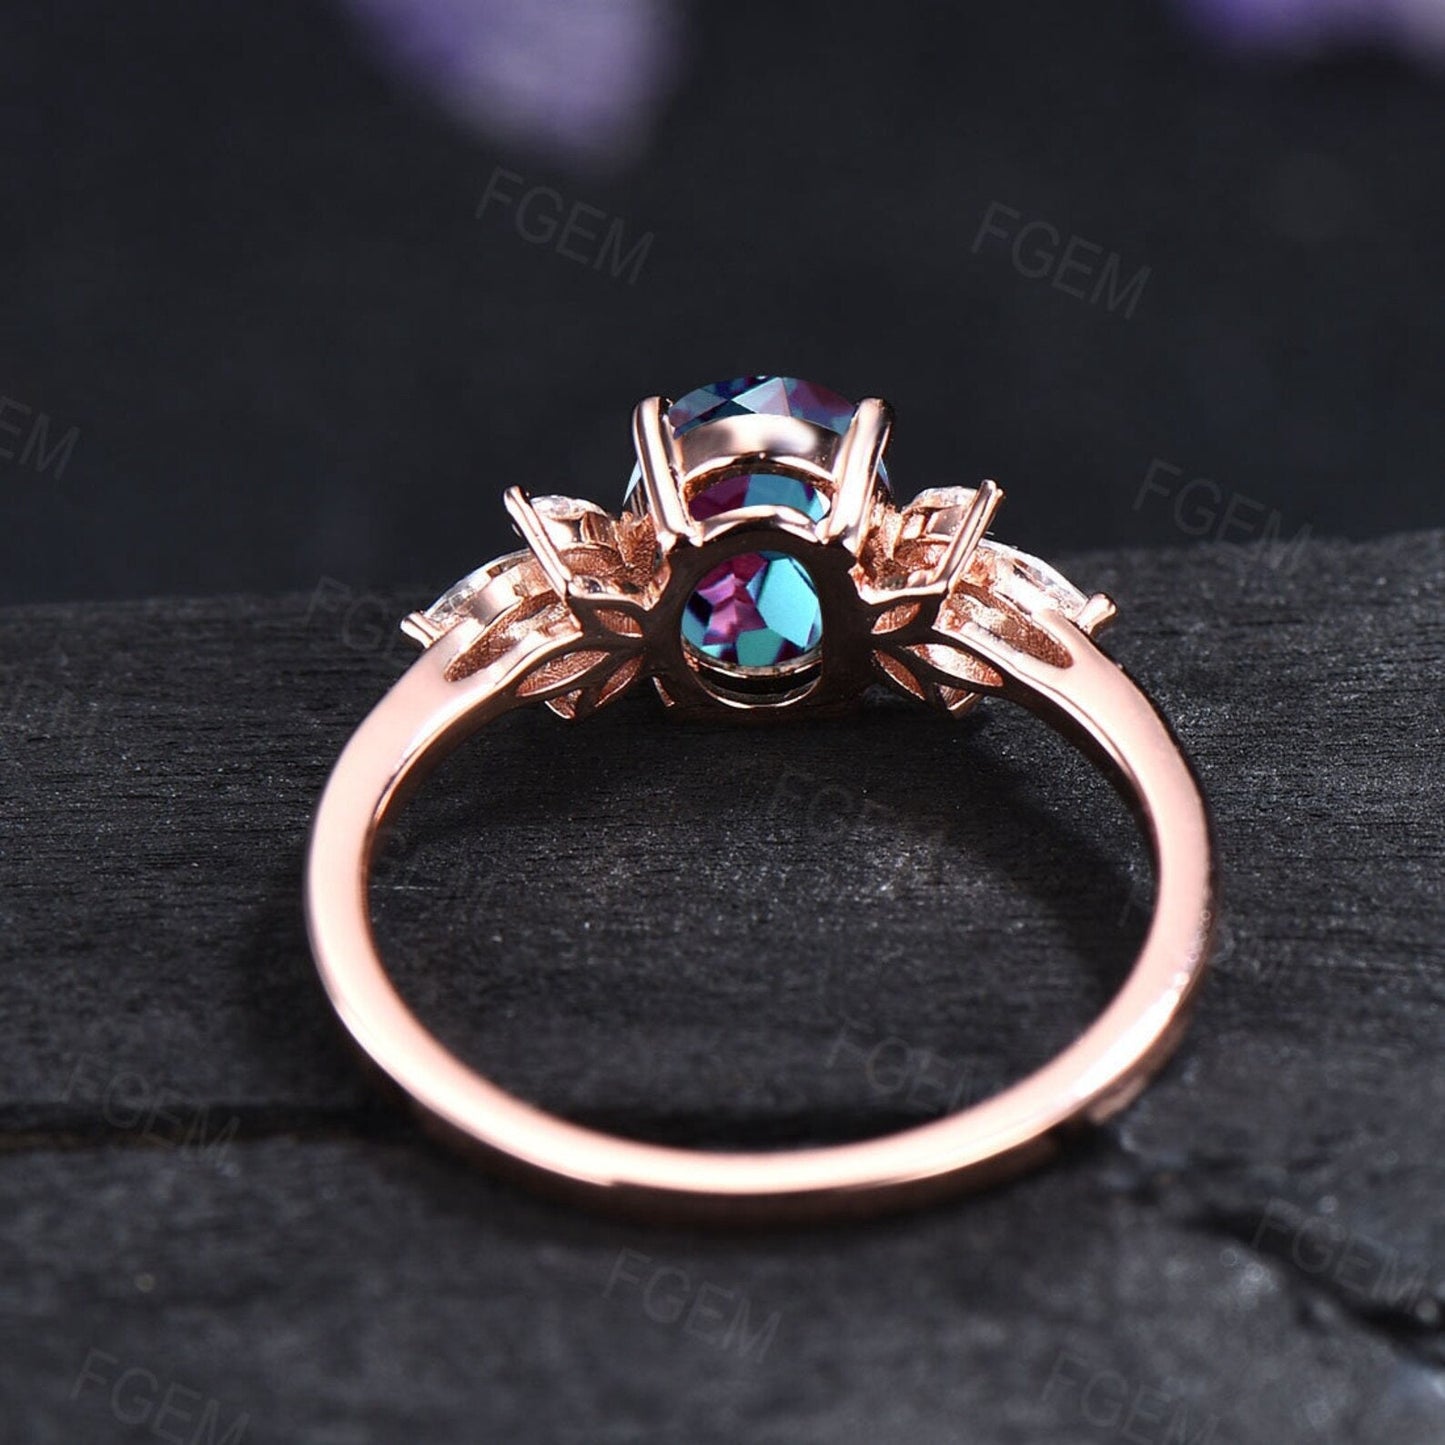 1.5ct Oval Cut Galaxy Blue Opal Promise Ring Sterling Silver Cluster CZ Diamond Flower Wedding Ring Unique Handmade Proposal Gifts for Women